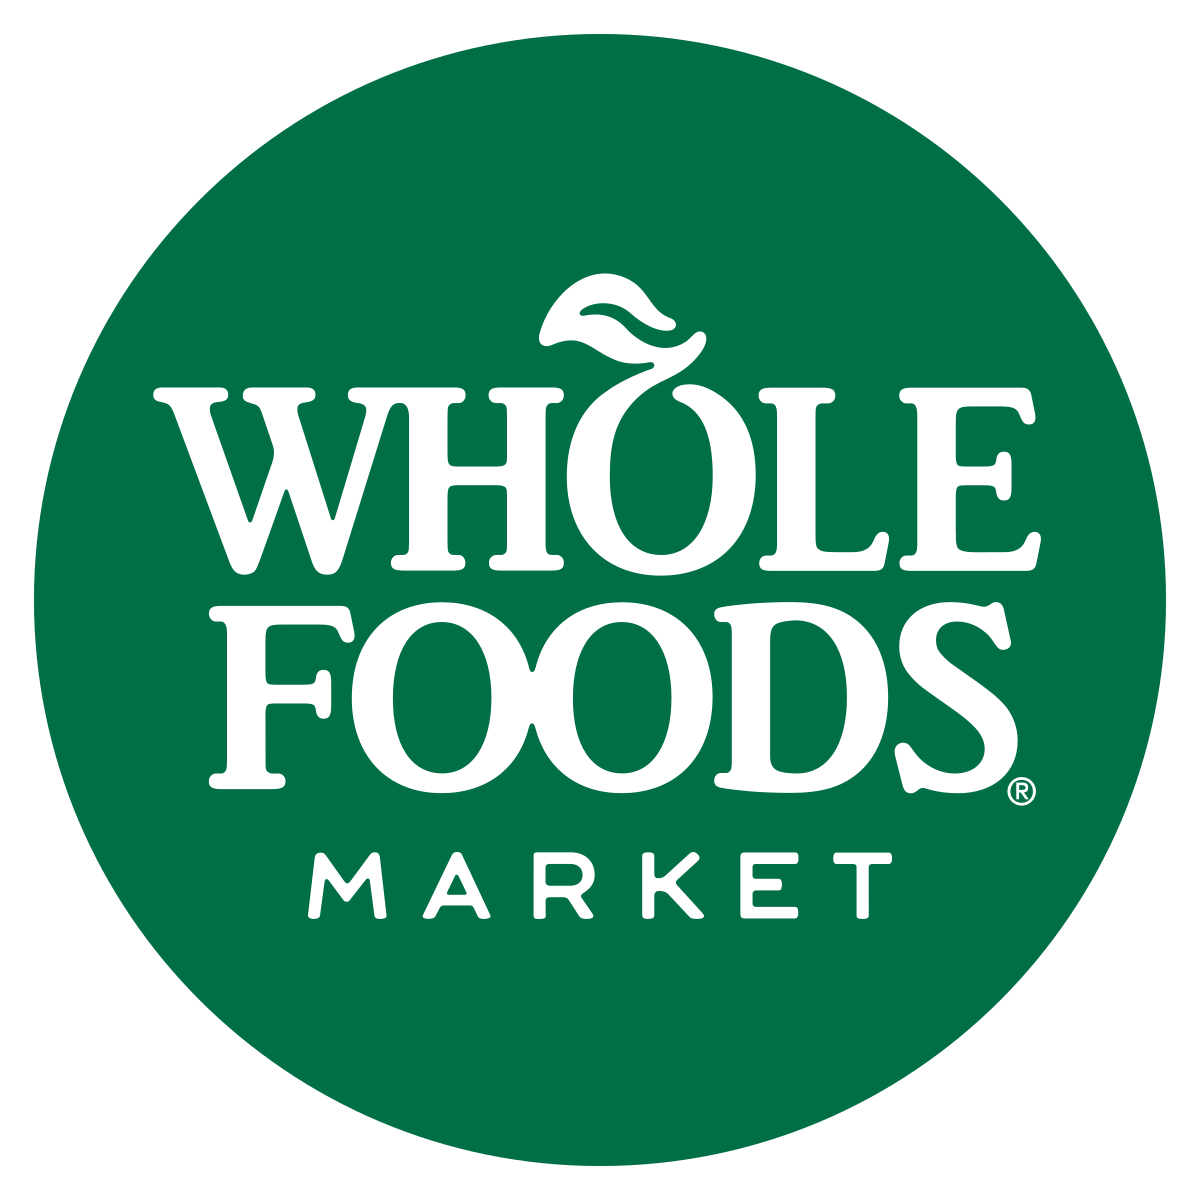 Pittsburgh Whole Foods site eyed by The Fresh Market